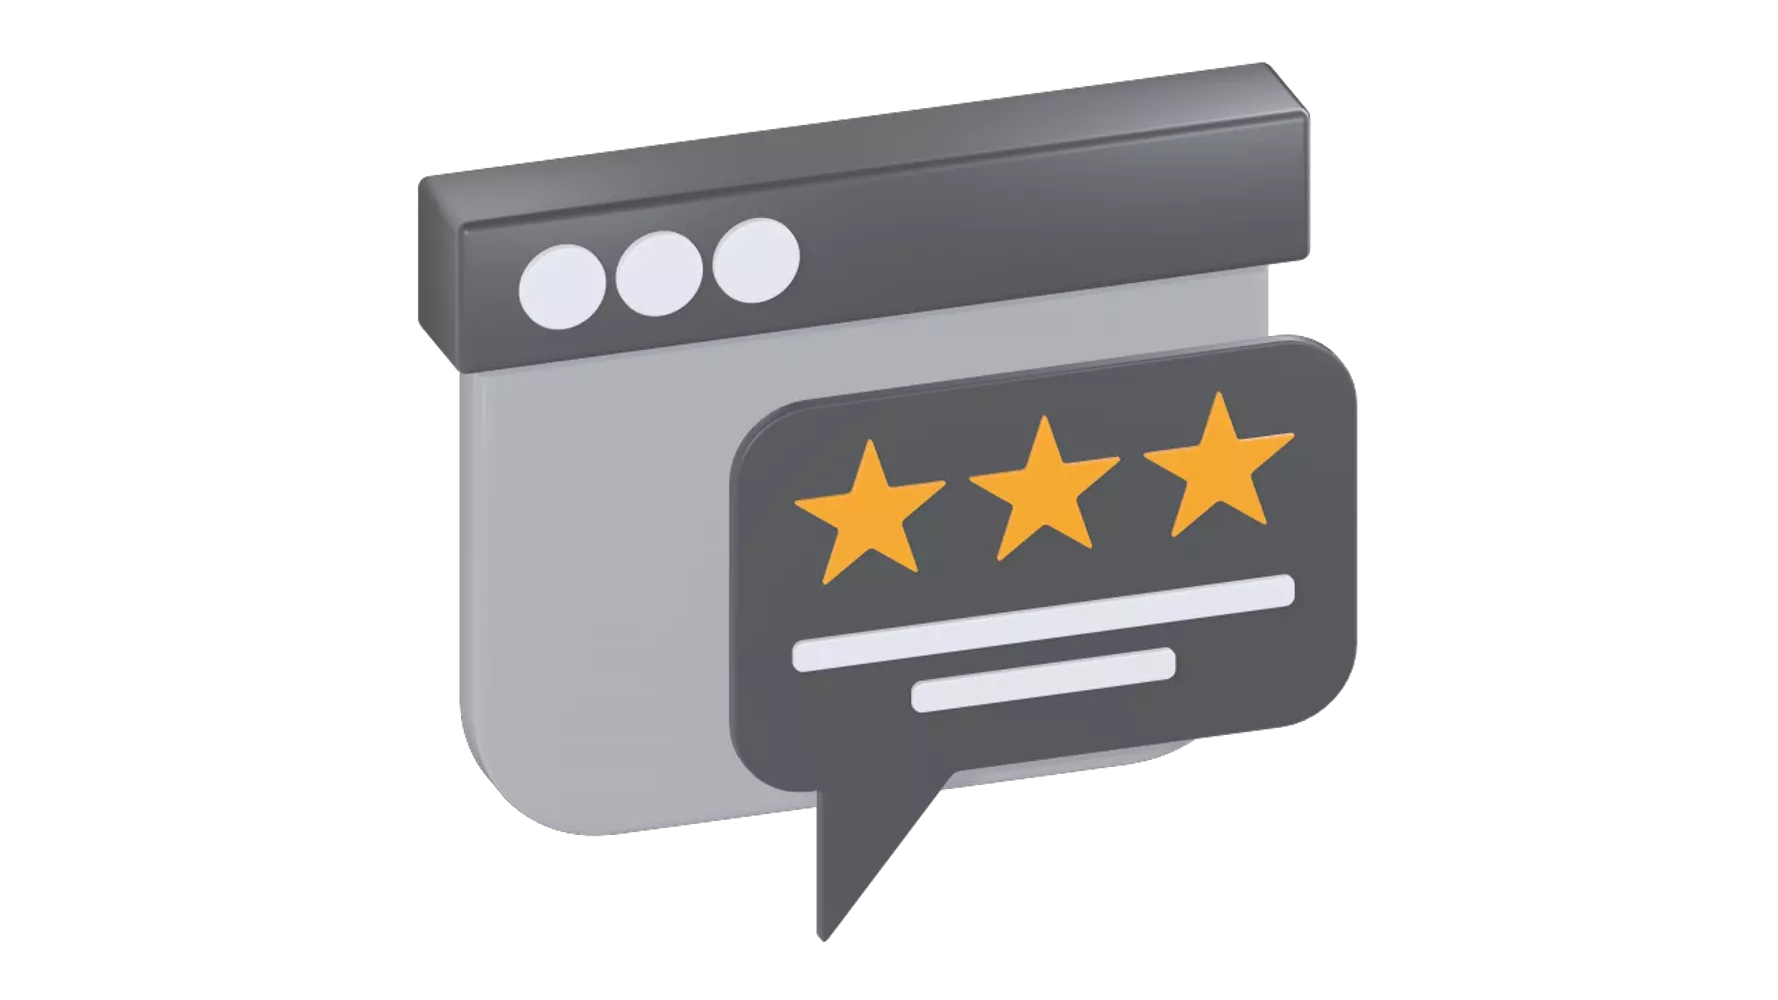 Customer Reviews 3D Graphic